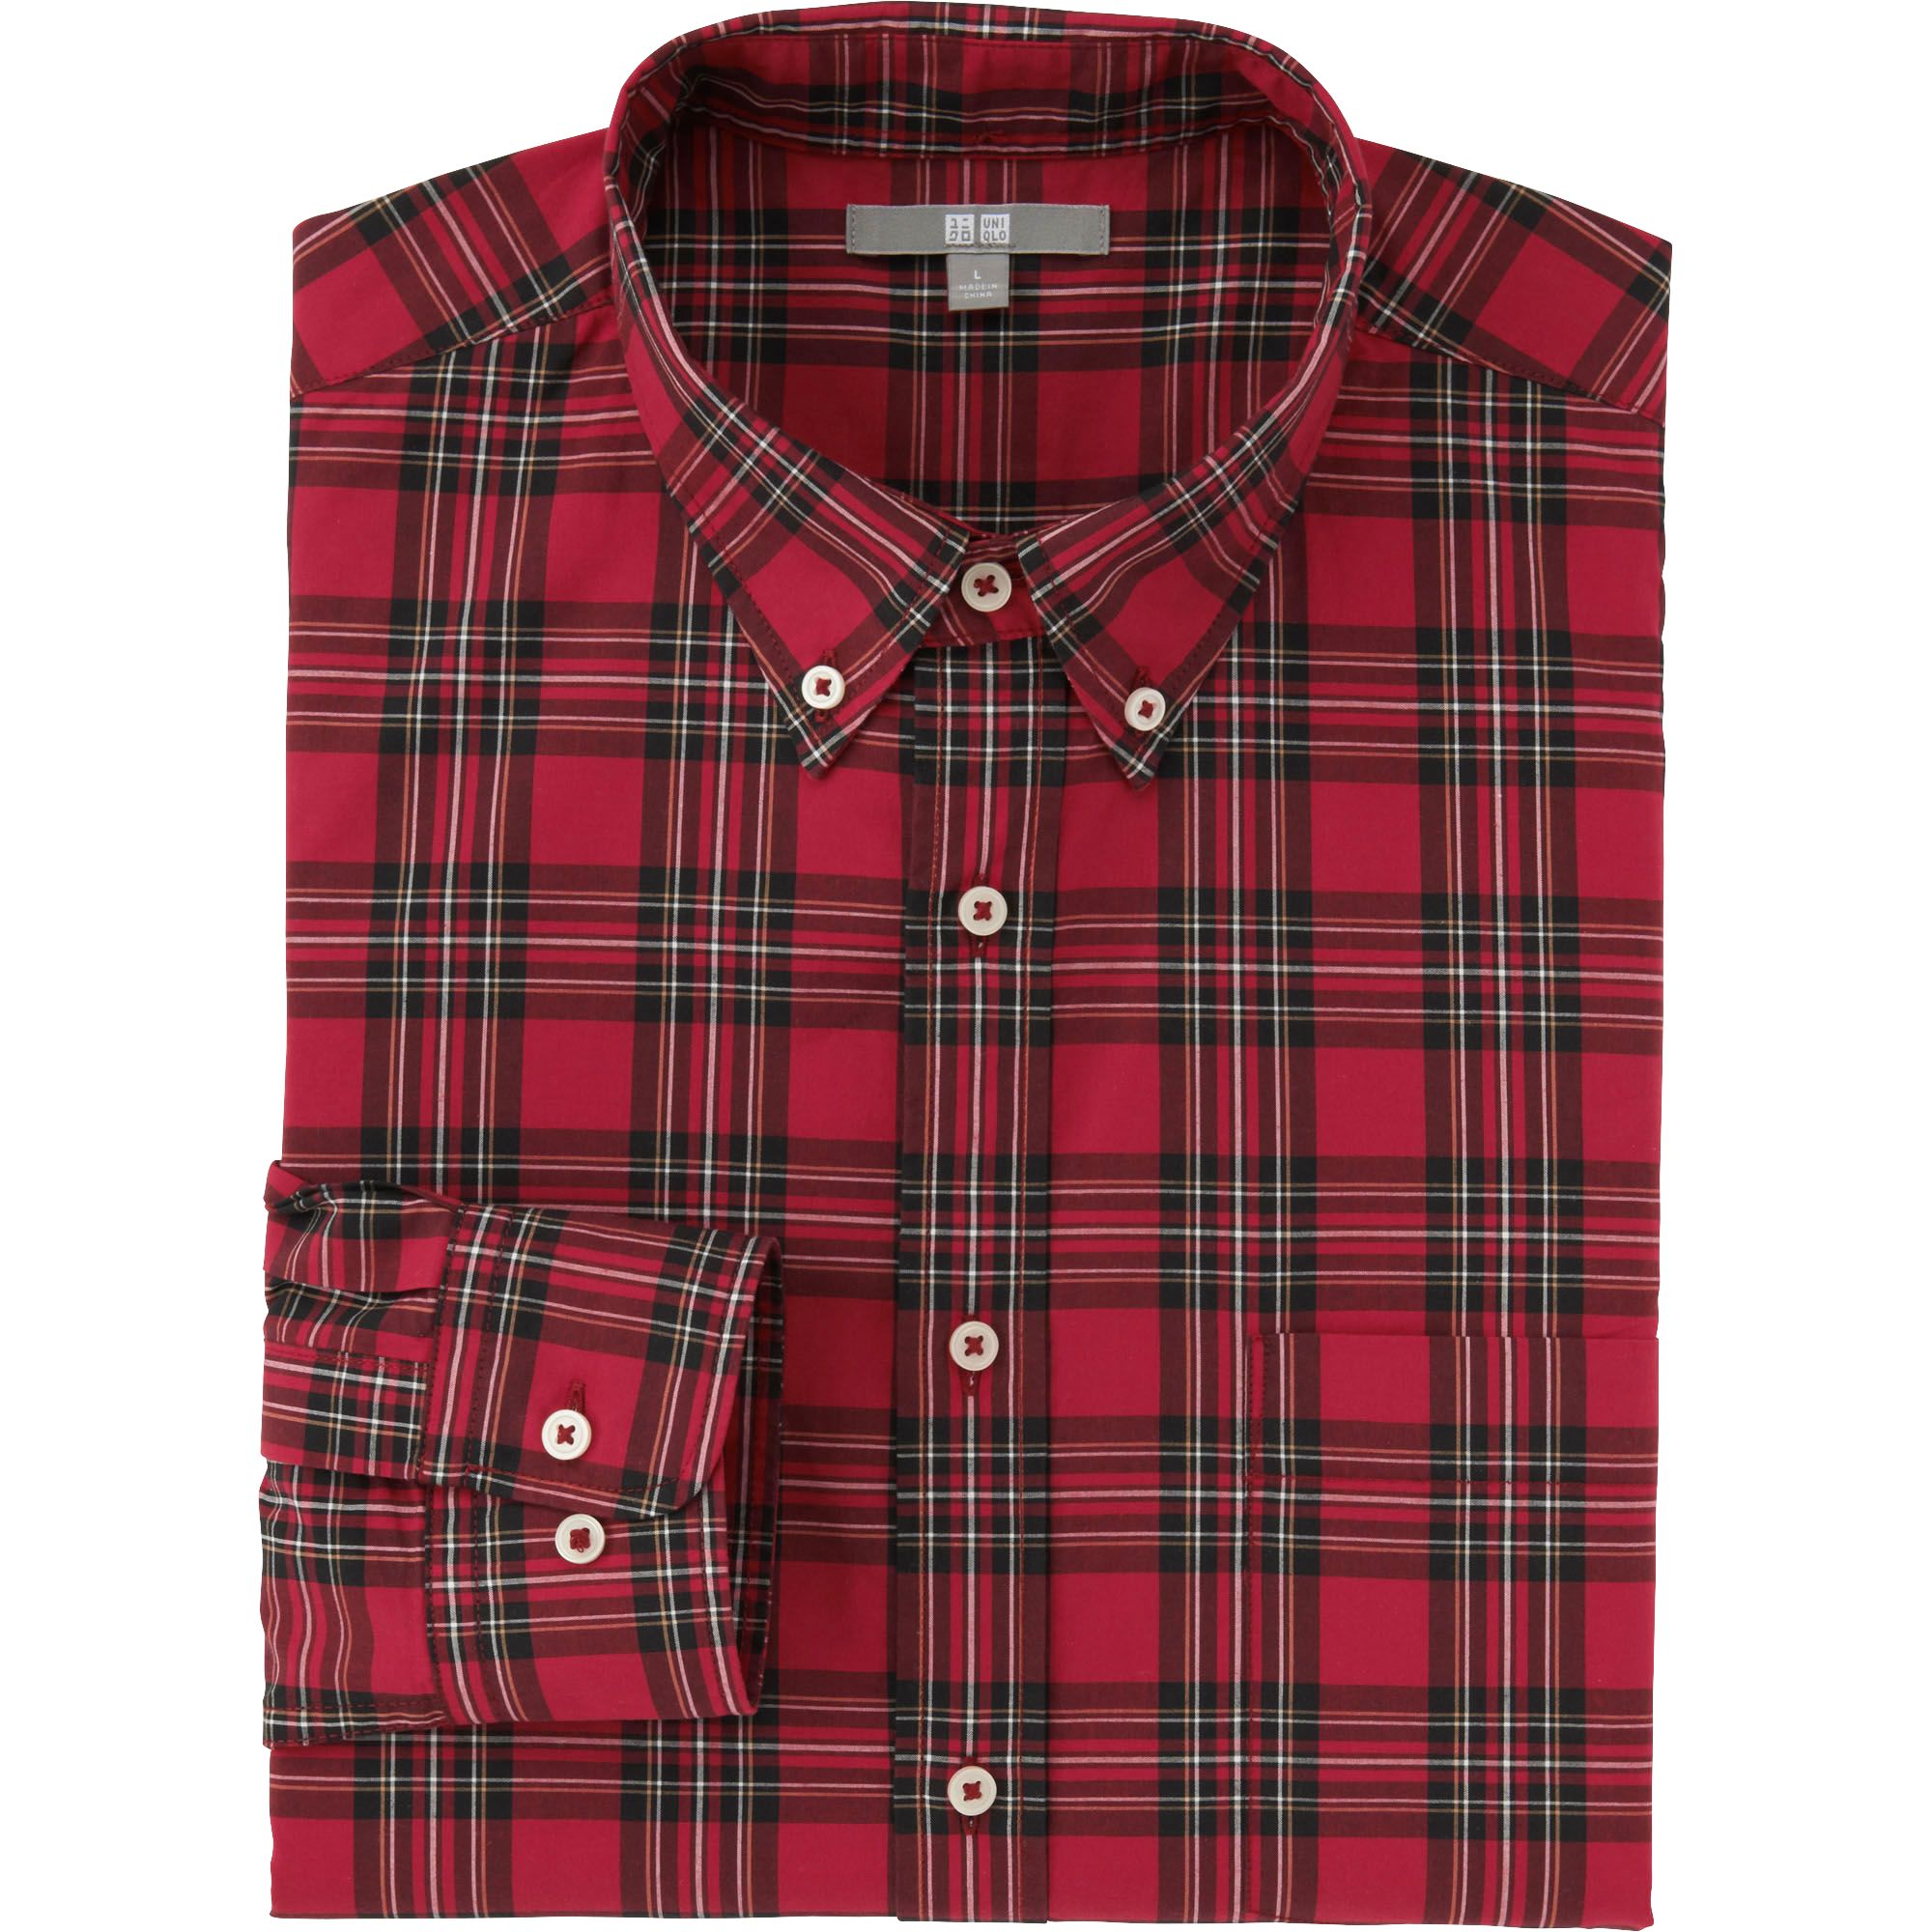 MEN EXTRA FINE COTTON BROADCLOTH CHECKERED LONG SLEEVE SHIRT | UNIQLO US